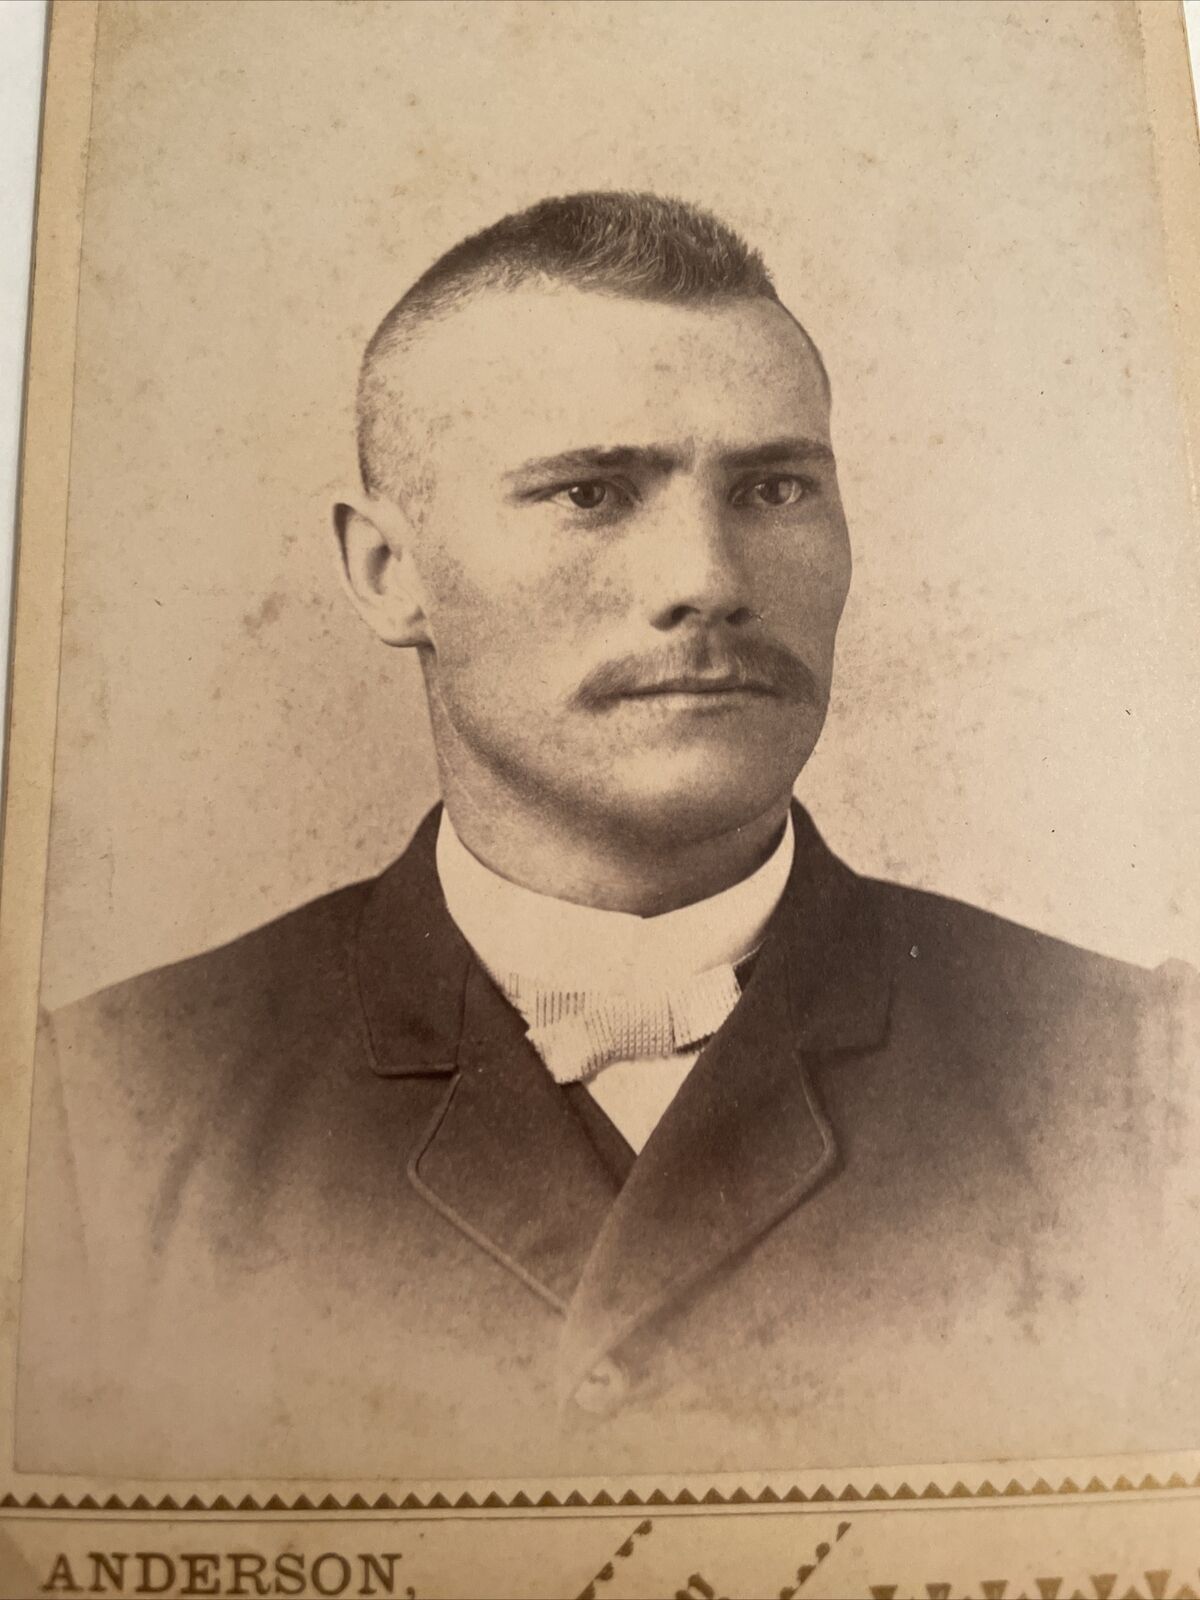 Antique Cabinet Card Photo Mohawk Crew Military Haircut 1890 Mustache Indiana